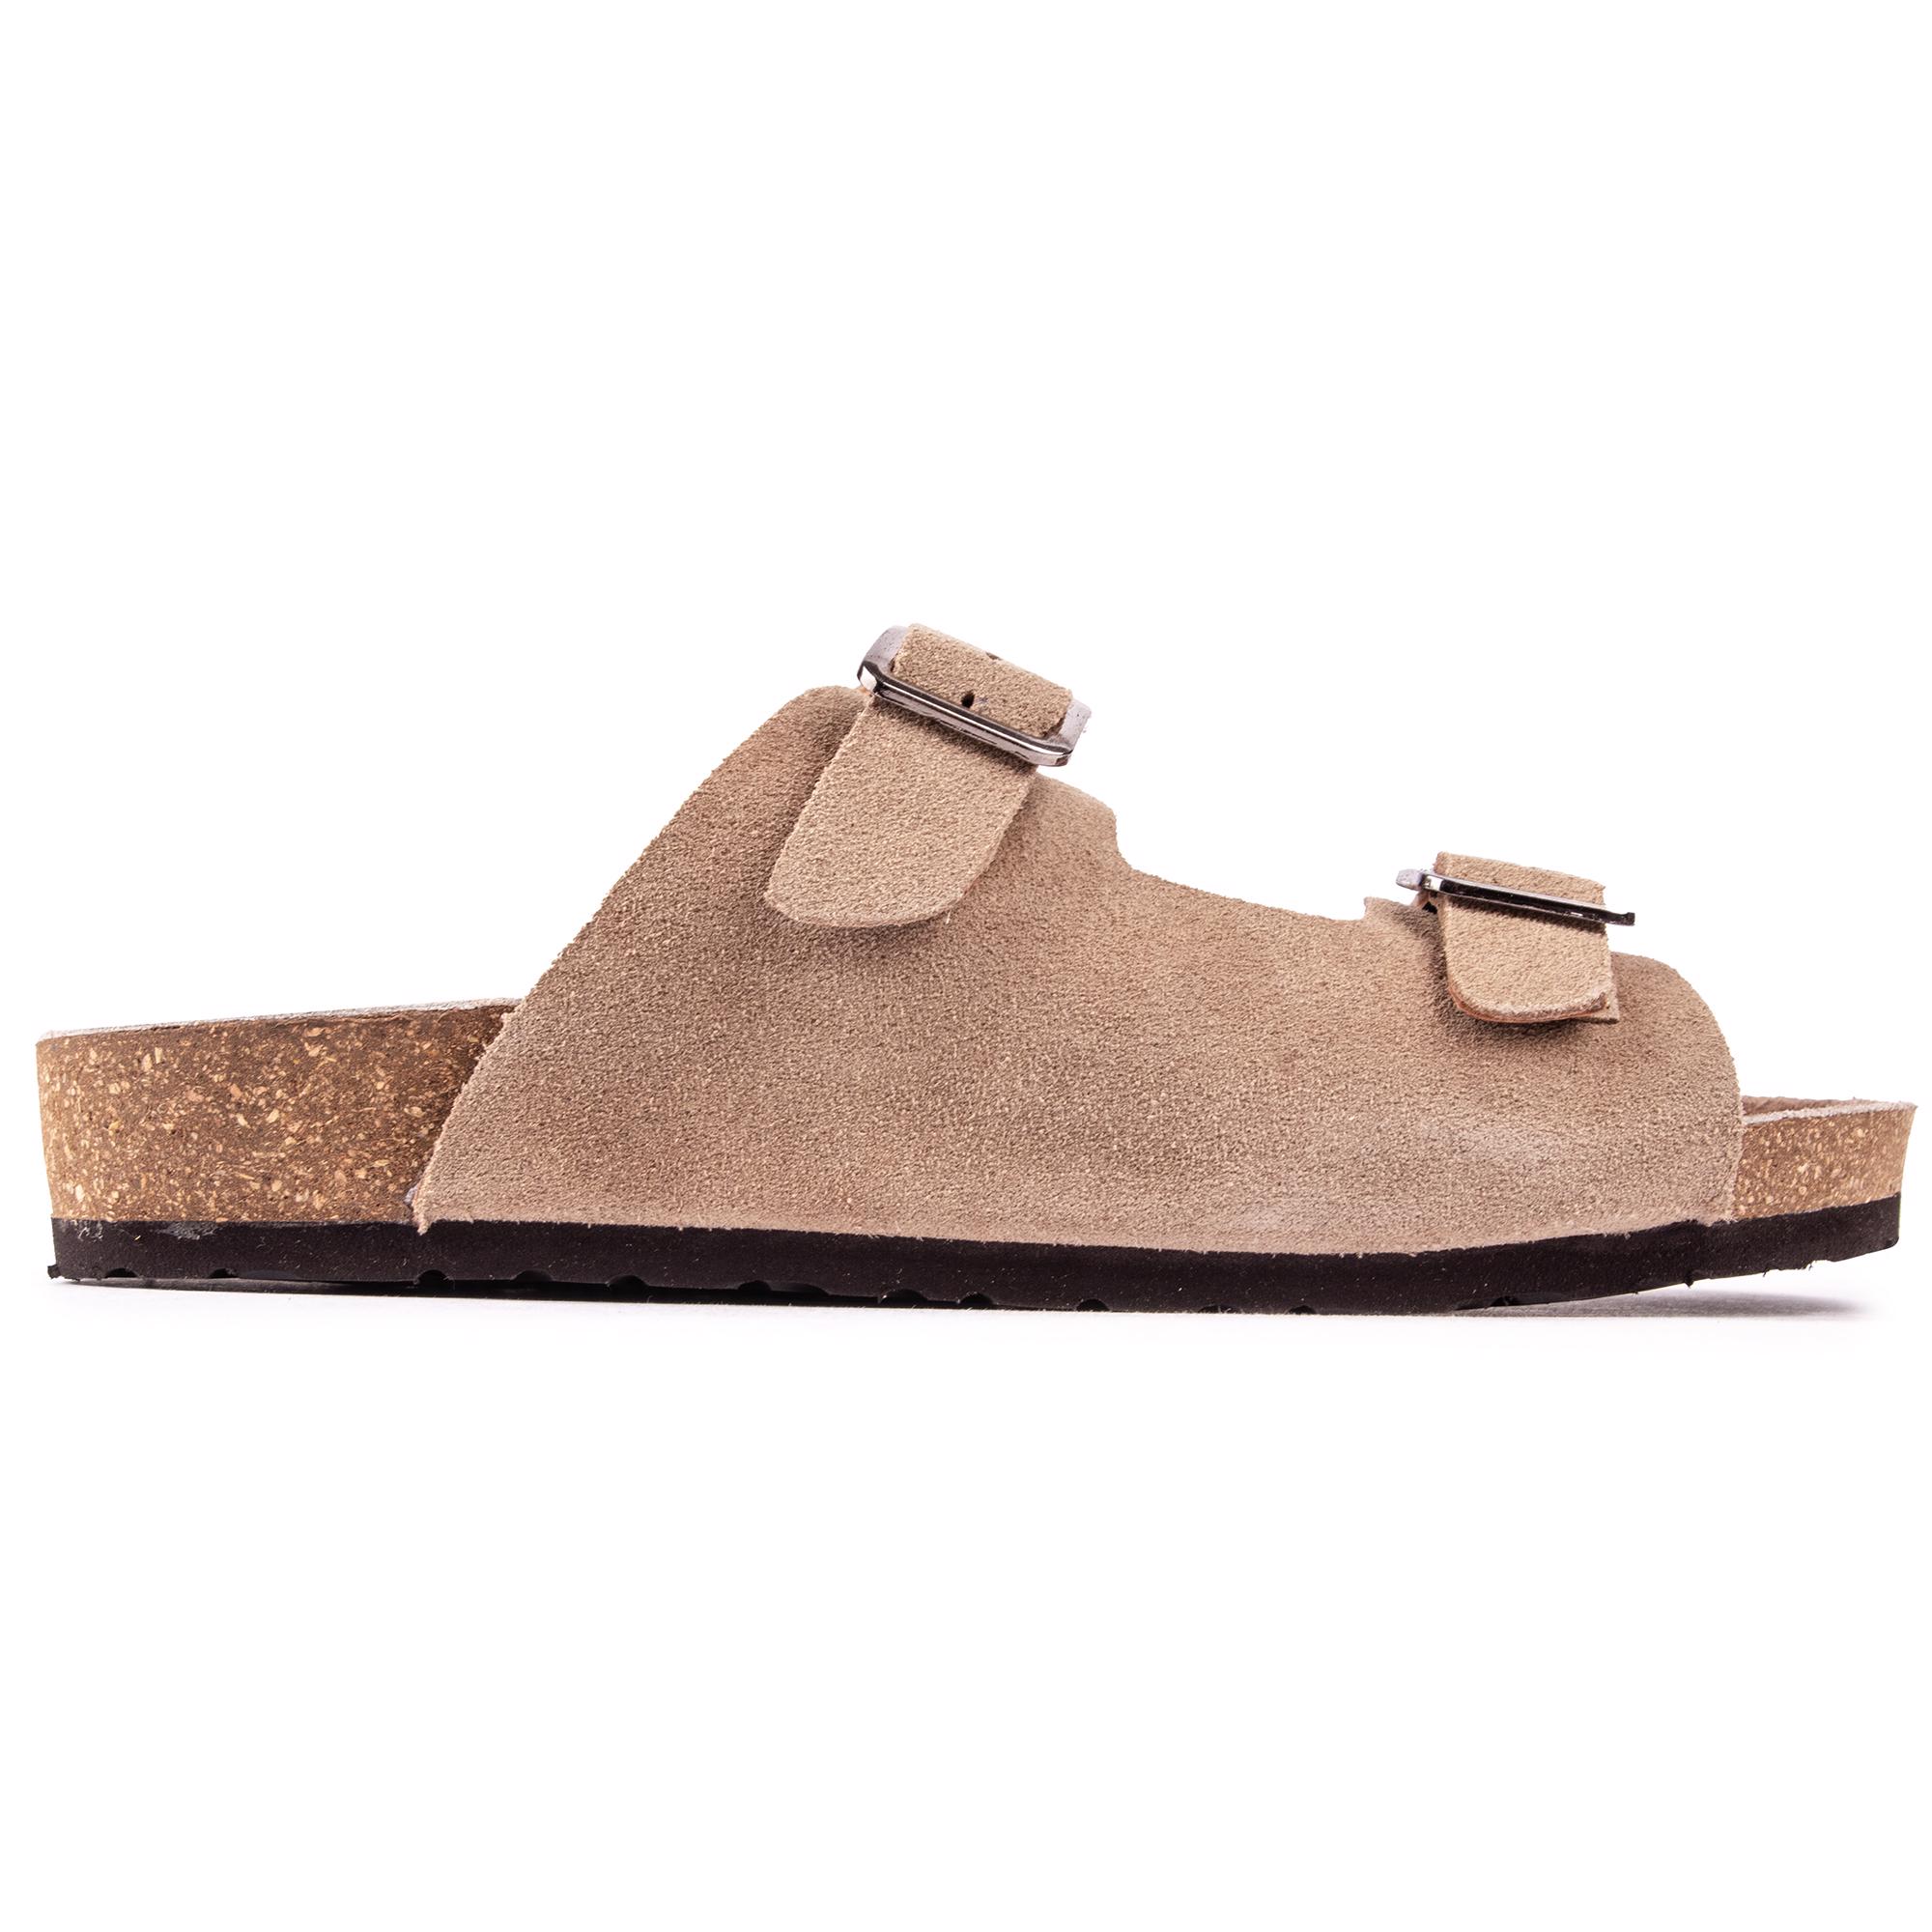 RAVEL Womens Metis Flats Sandals Taupe